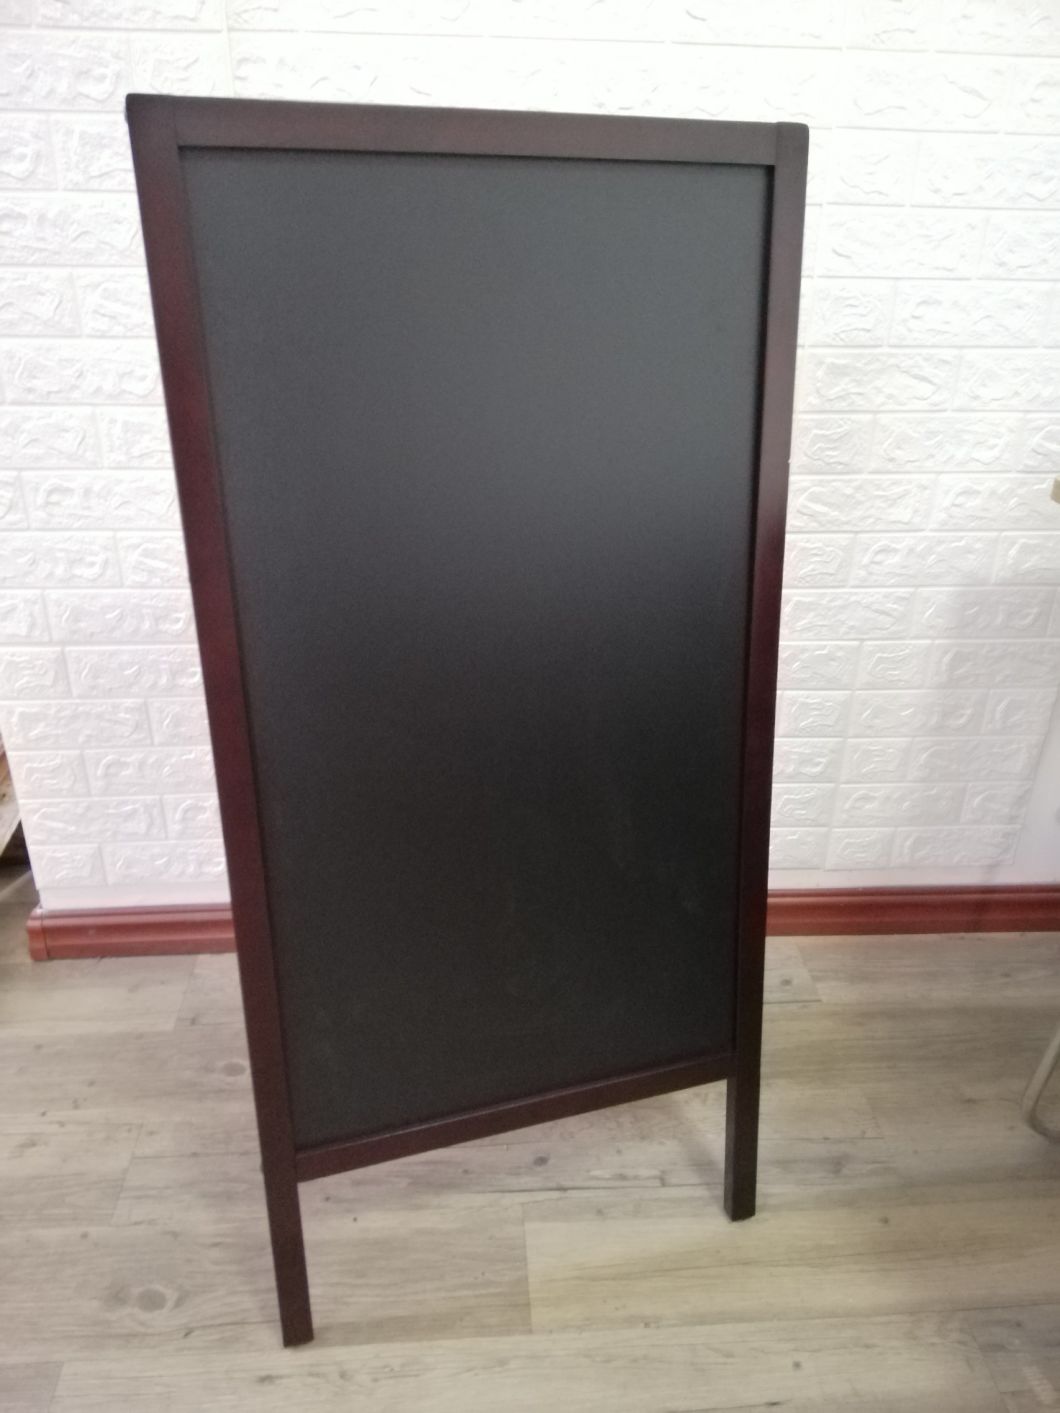 Painted Wooden Frame Color Double Sides a Stanboard Chalkboard Outdoor Blackboard Easel